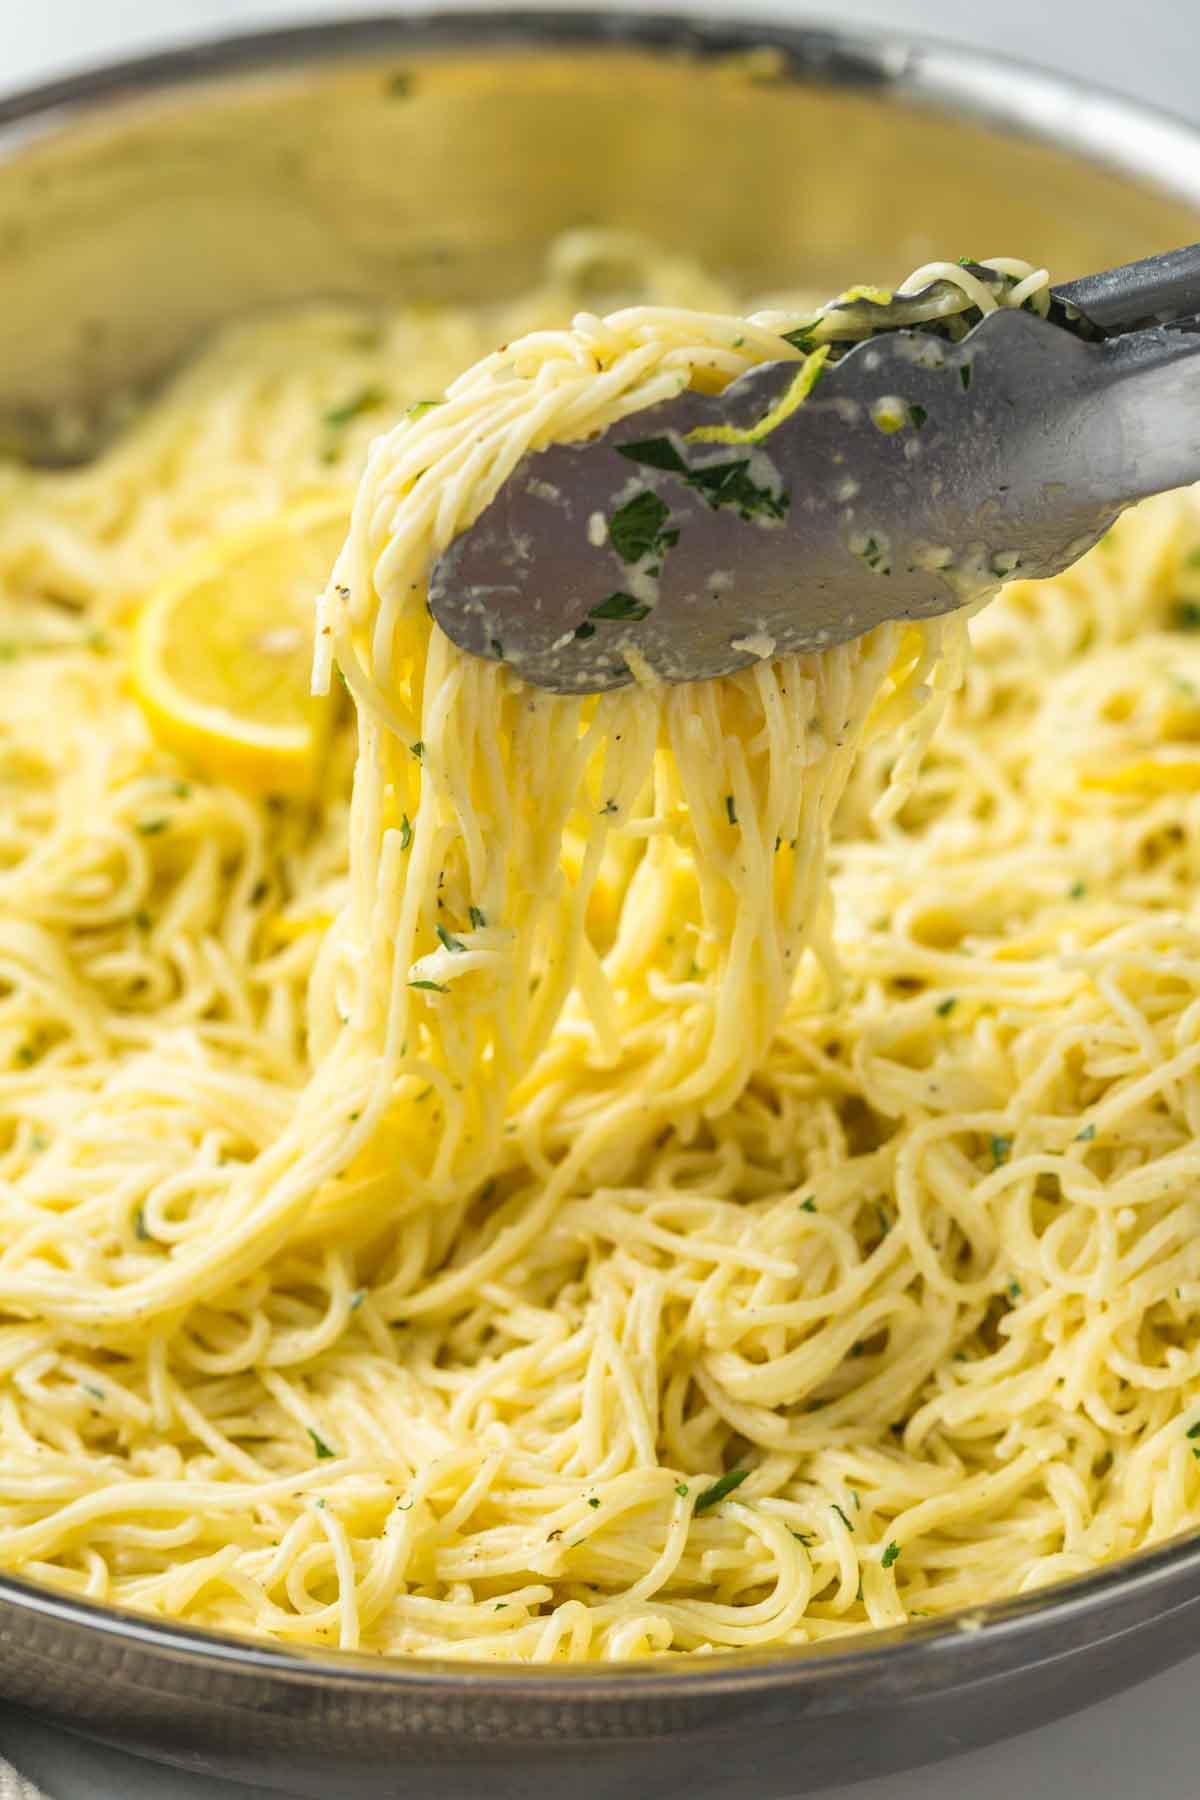 Lemon pasta in a stainless steel skillet, serving pasta using kitchen tongs